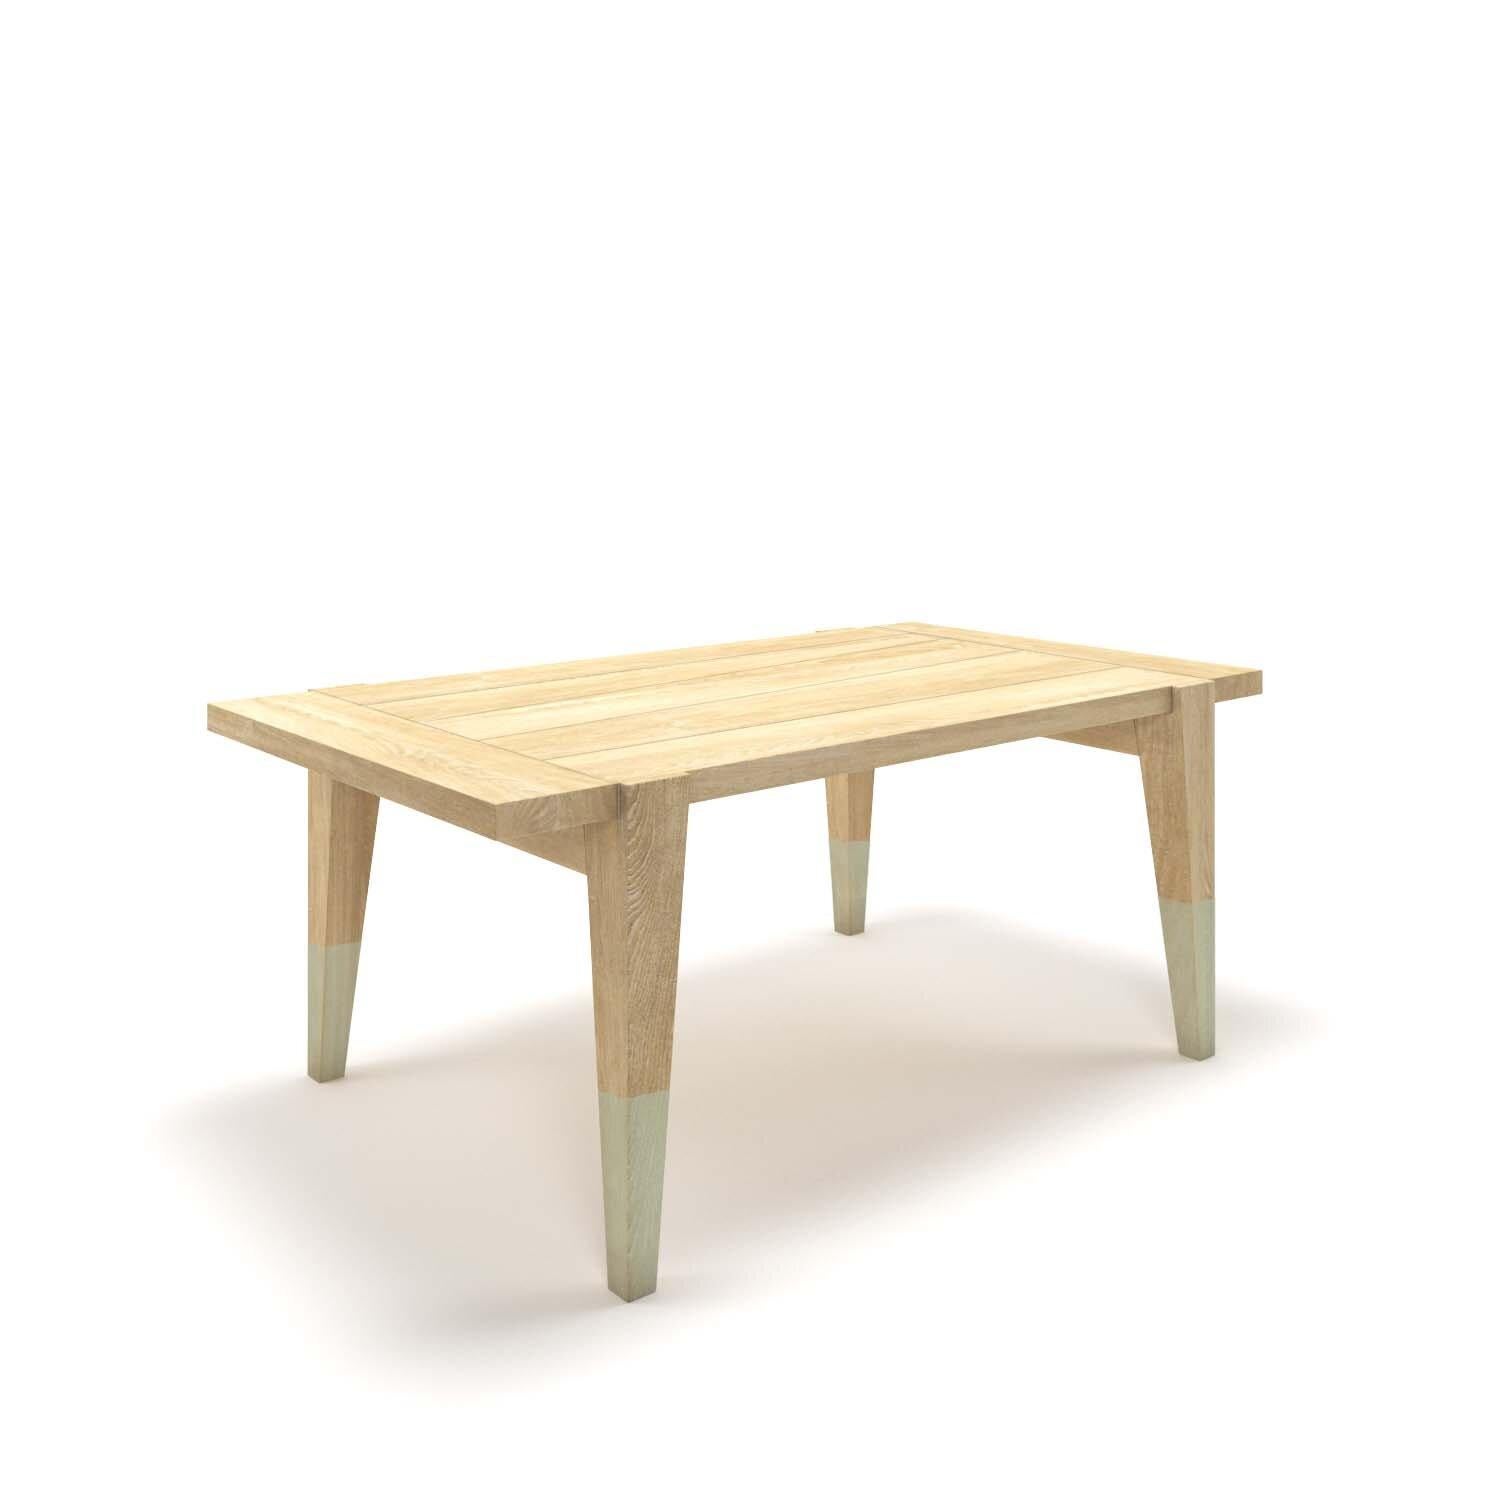 Country Uva Dining Table S For Sale